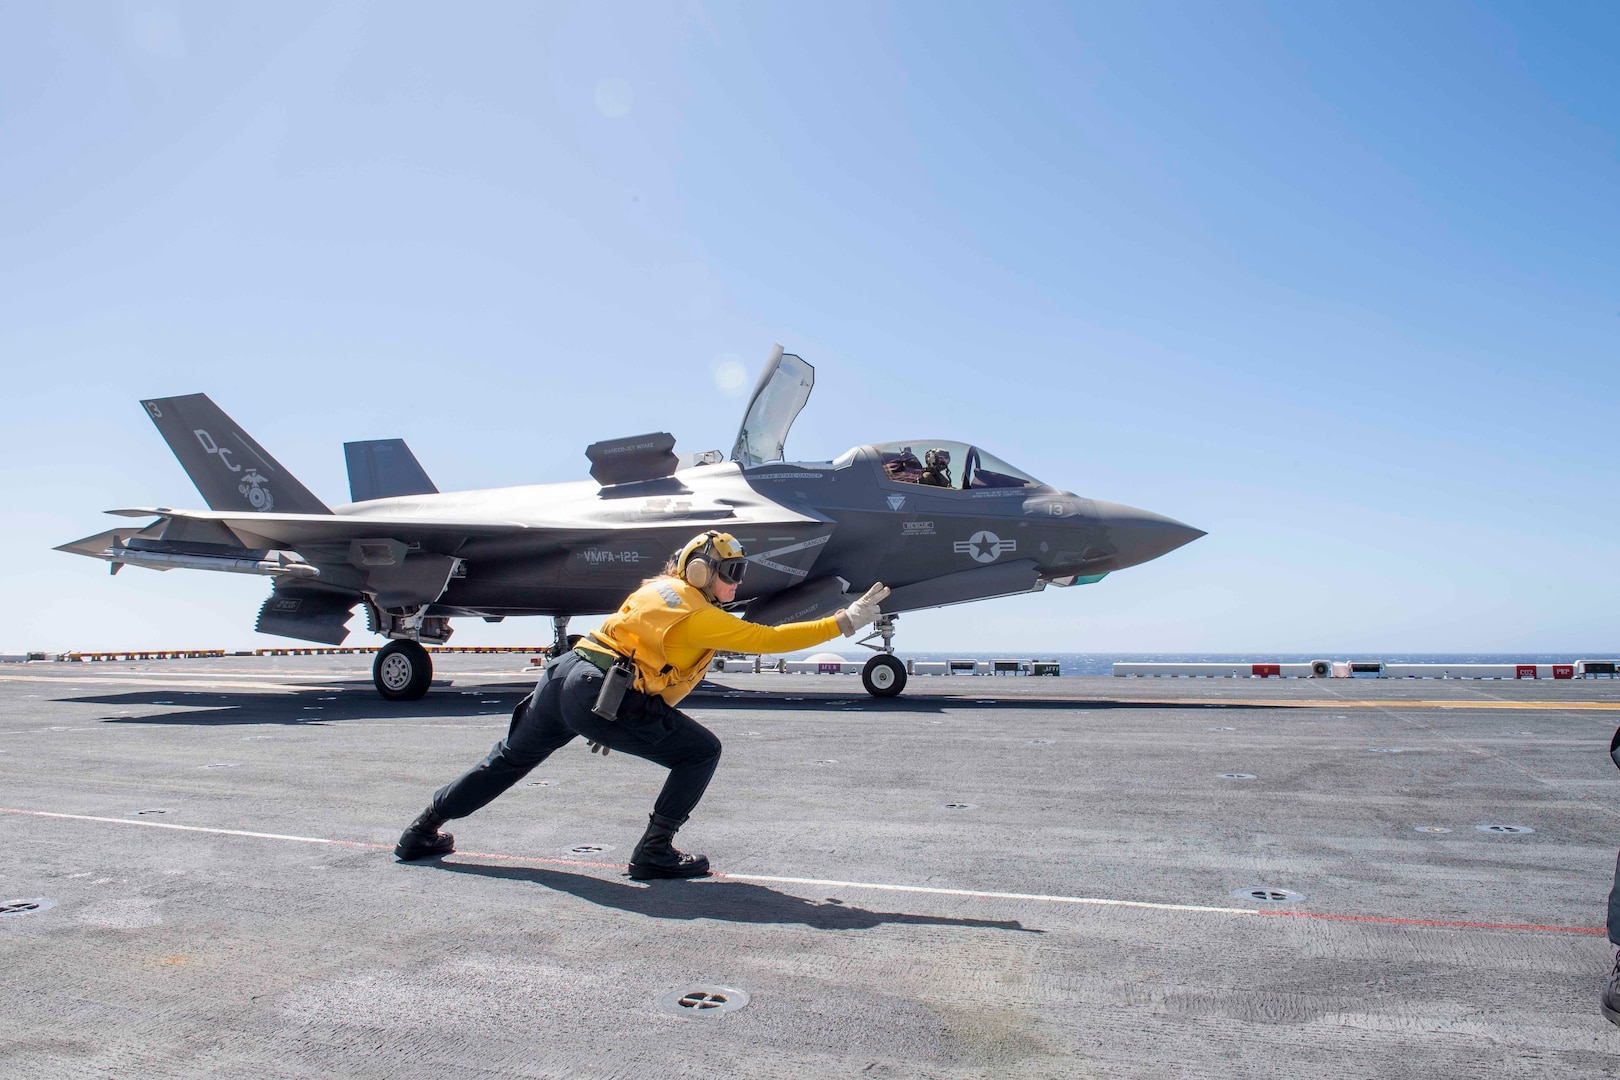 Navy Petty Officer 2nd Class Sabrina Bales, assigned to the amphibious assault ship USS America, signals an F-35B Lightning II from Marine Fighter Squadron 122 to take off from the ship’s flight deck. As the Product Support Provider for North American Regional Warehousing for F-35 spare parts, DLA will help increase the Defense Department’s visibility of inventory as DoD works to decrease sustainment costs and improve readiness. Photo by Navy Petty Officer 3rd Class Vance Hand